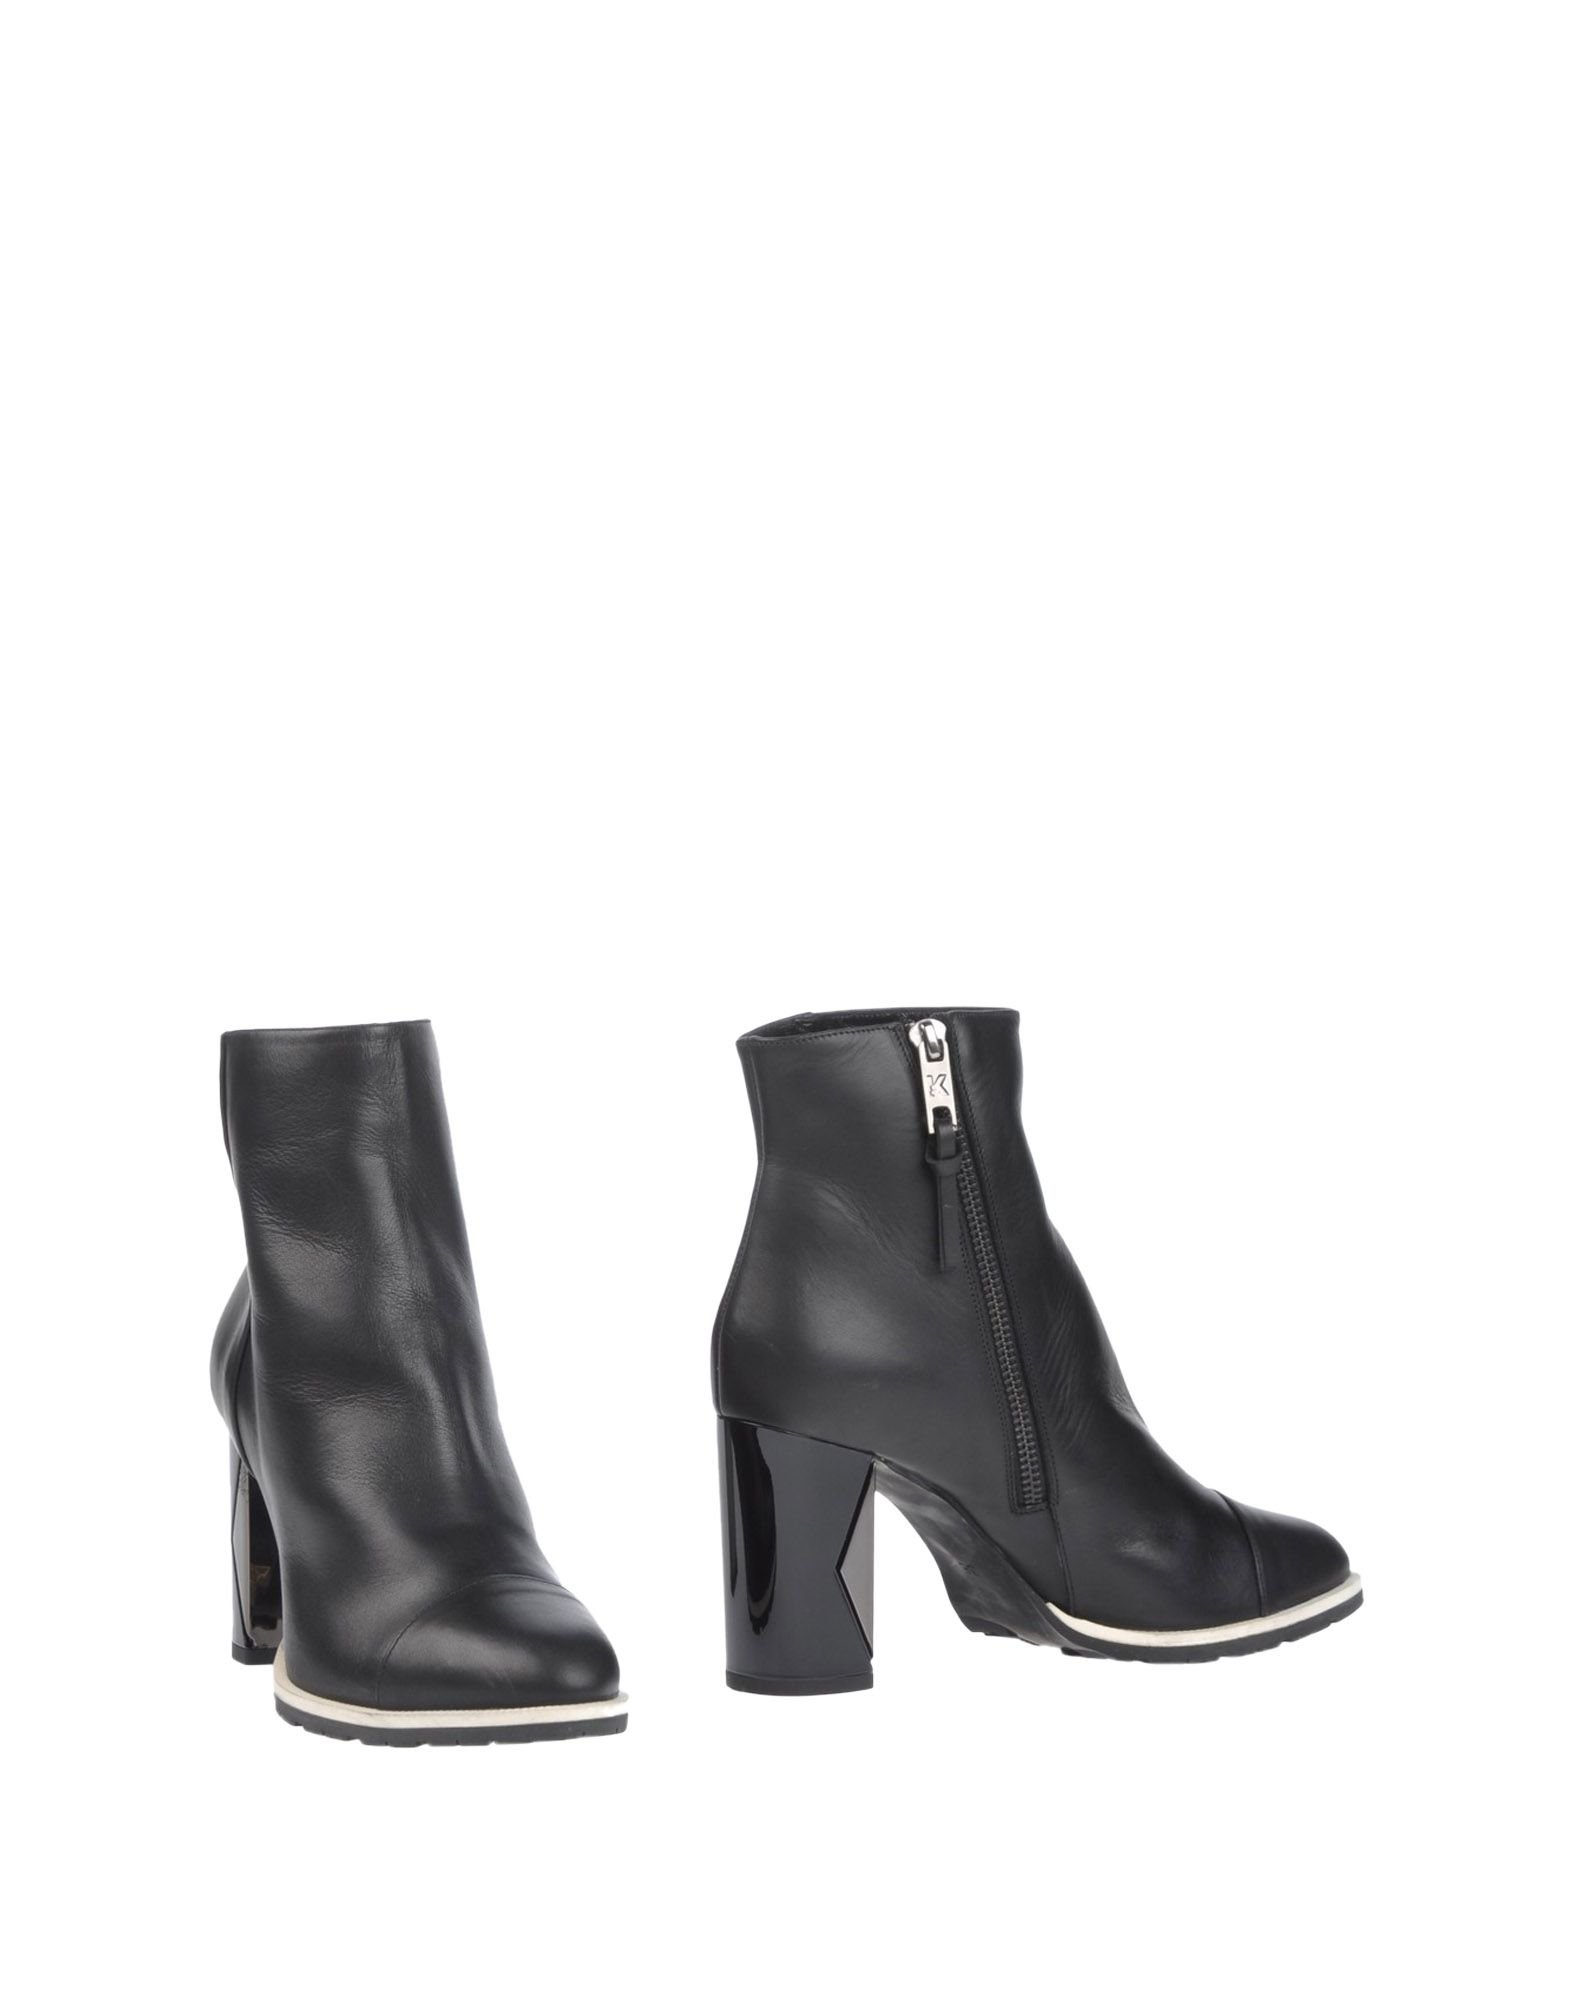 Karl Lagerfeld Ankle Boots in Black - Lyst